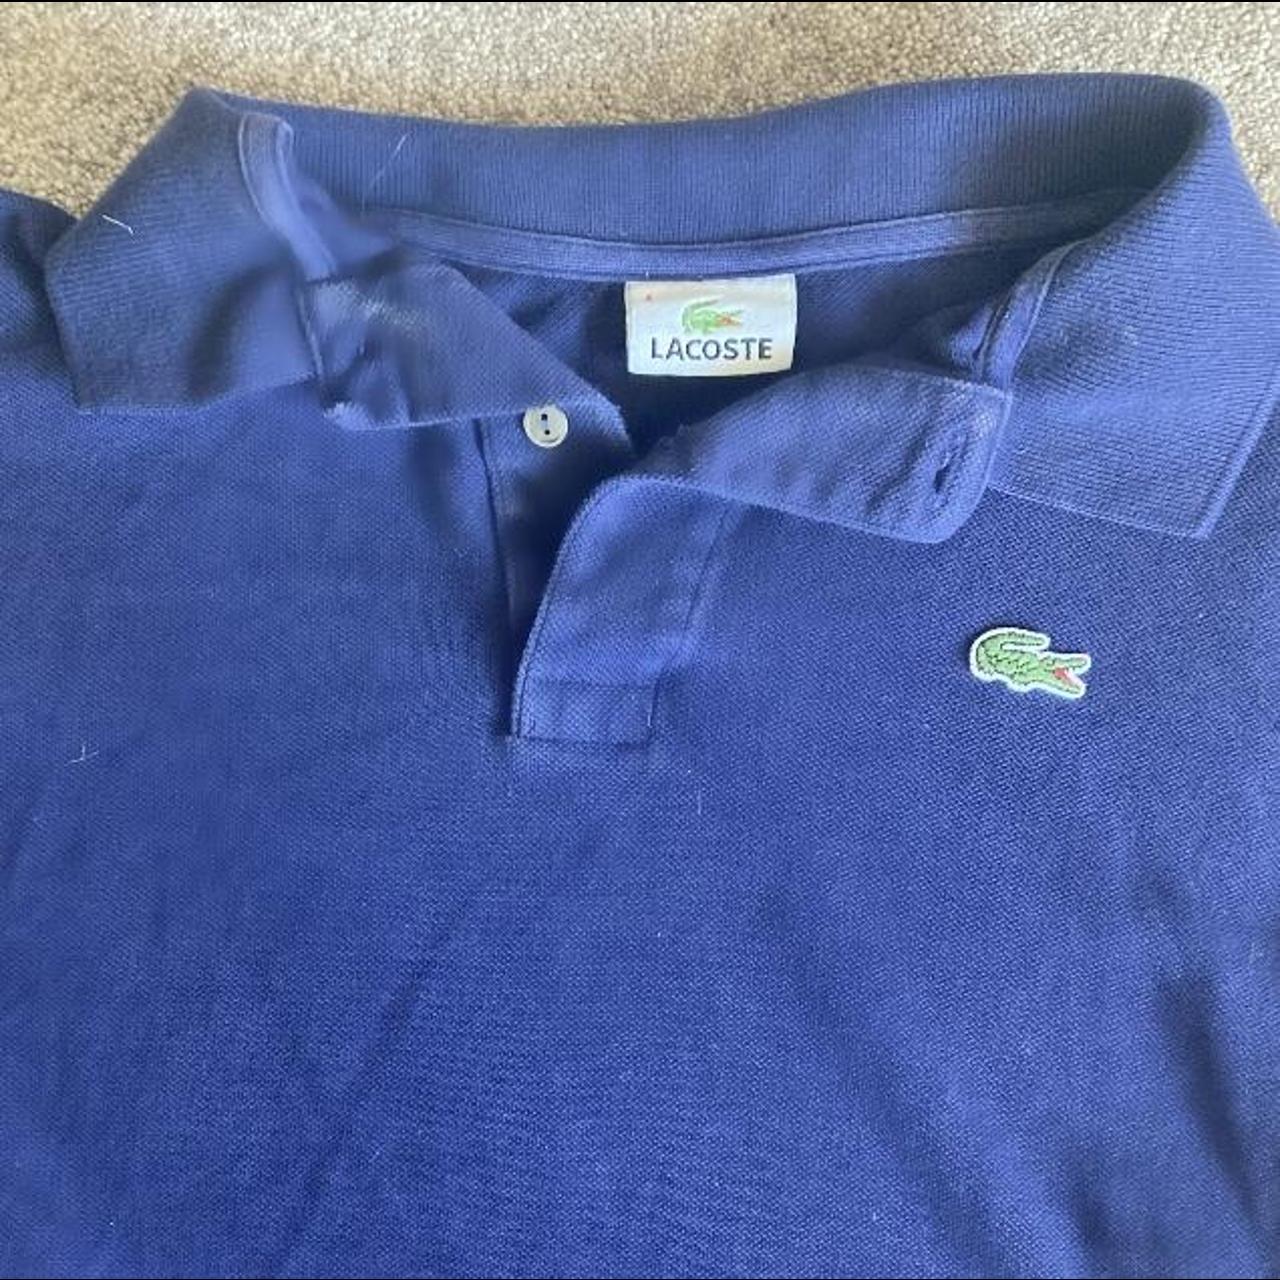 Lacoste blue t shirt in great condition... - Depop